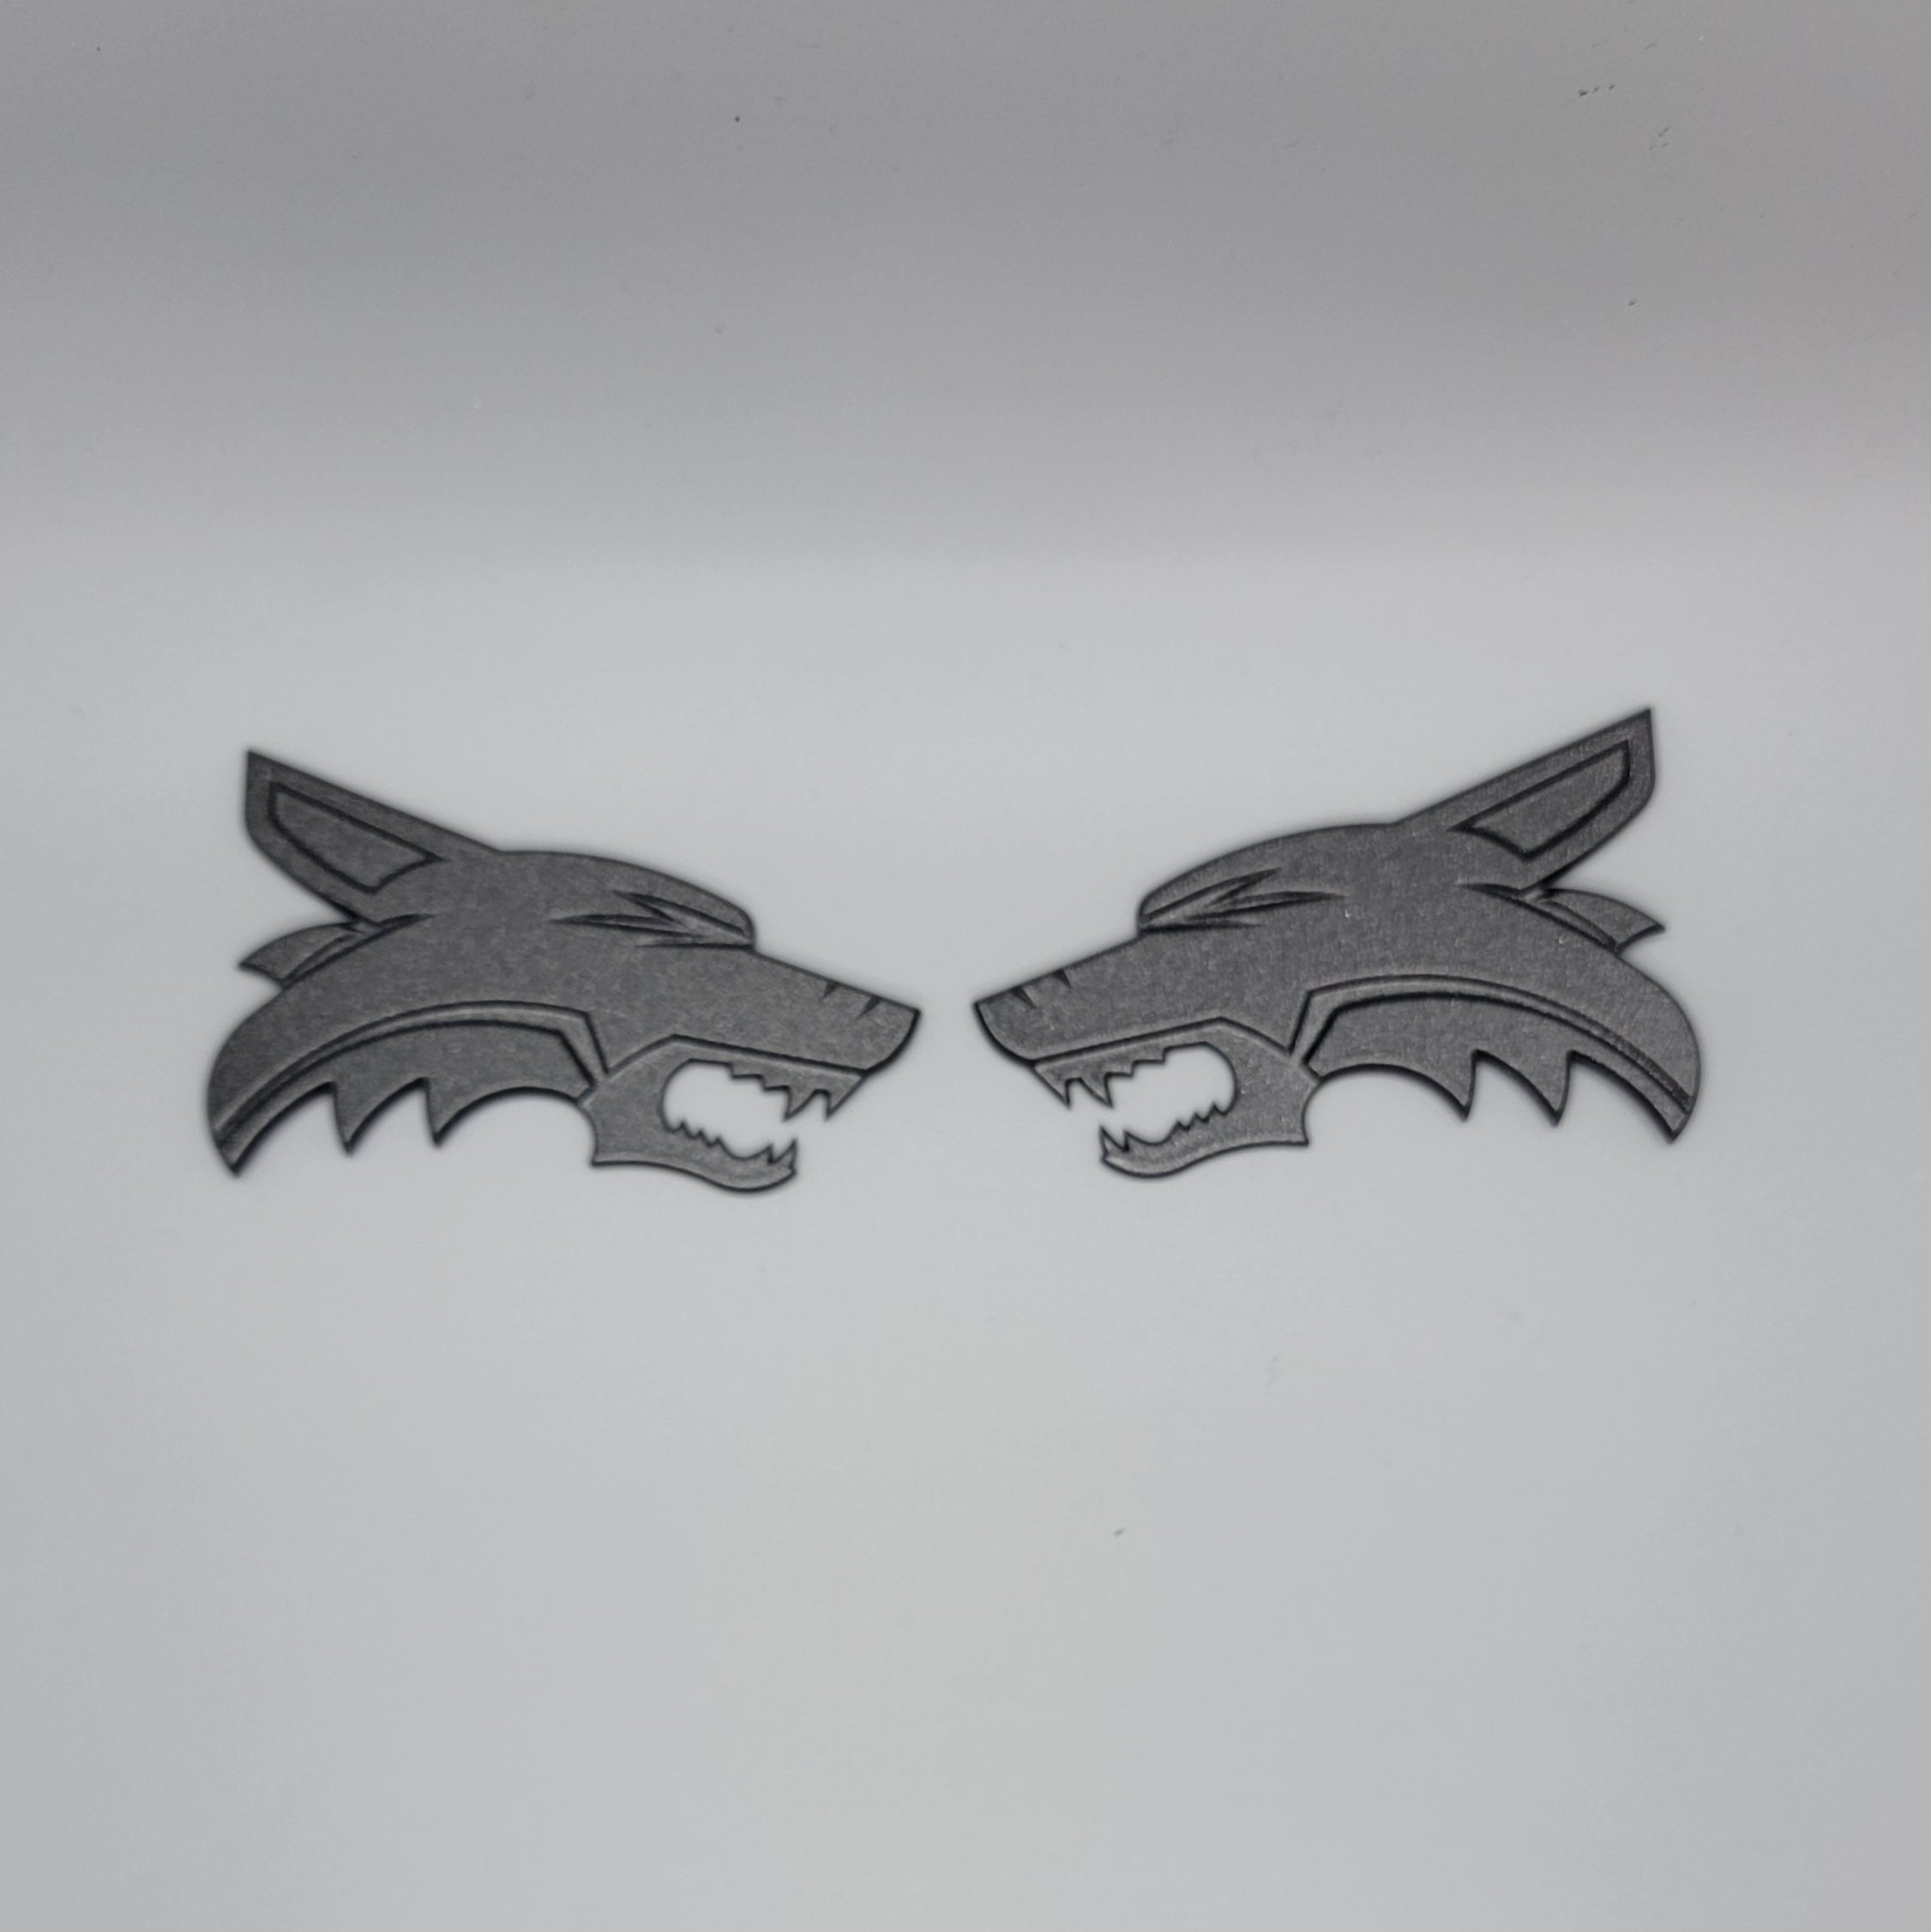 HIGH GLOSS TOPLOADER – Coyote Stickers